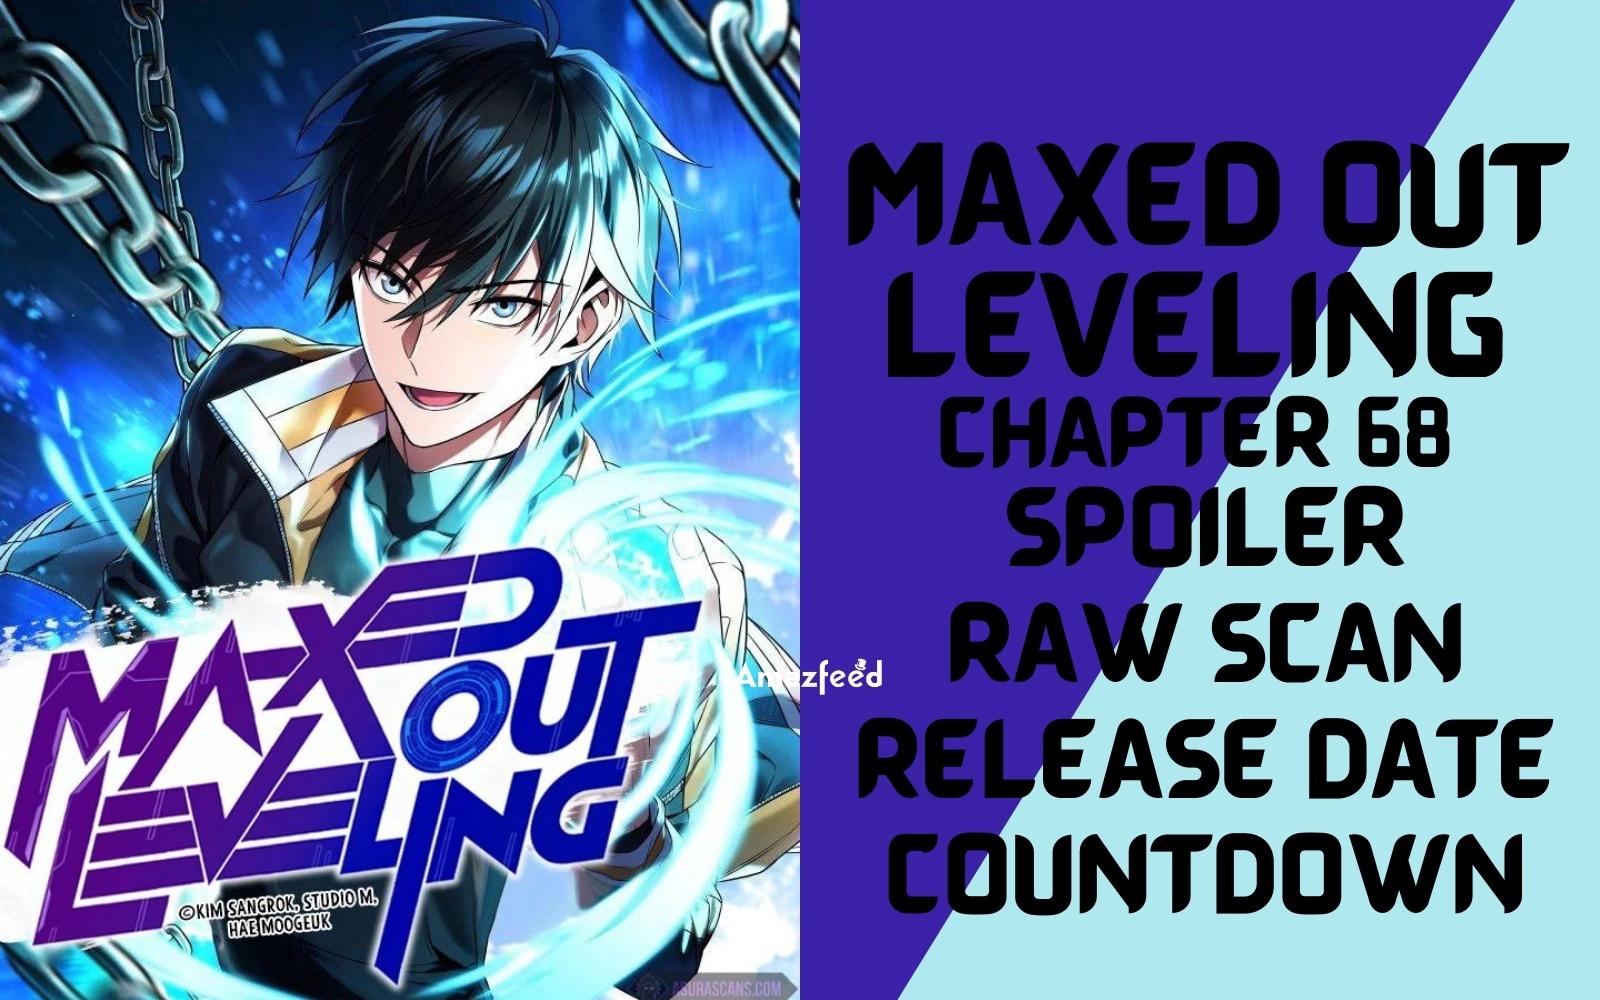 Maxed Out Leveling Chapter 68 Spoiler, Raw Scan, Plot, Color Page, Release Date